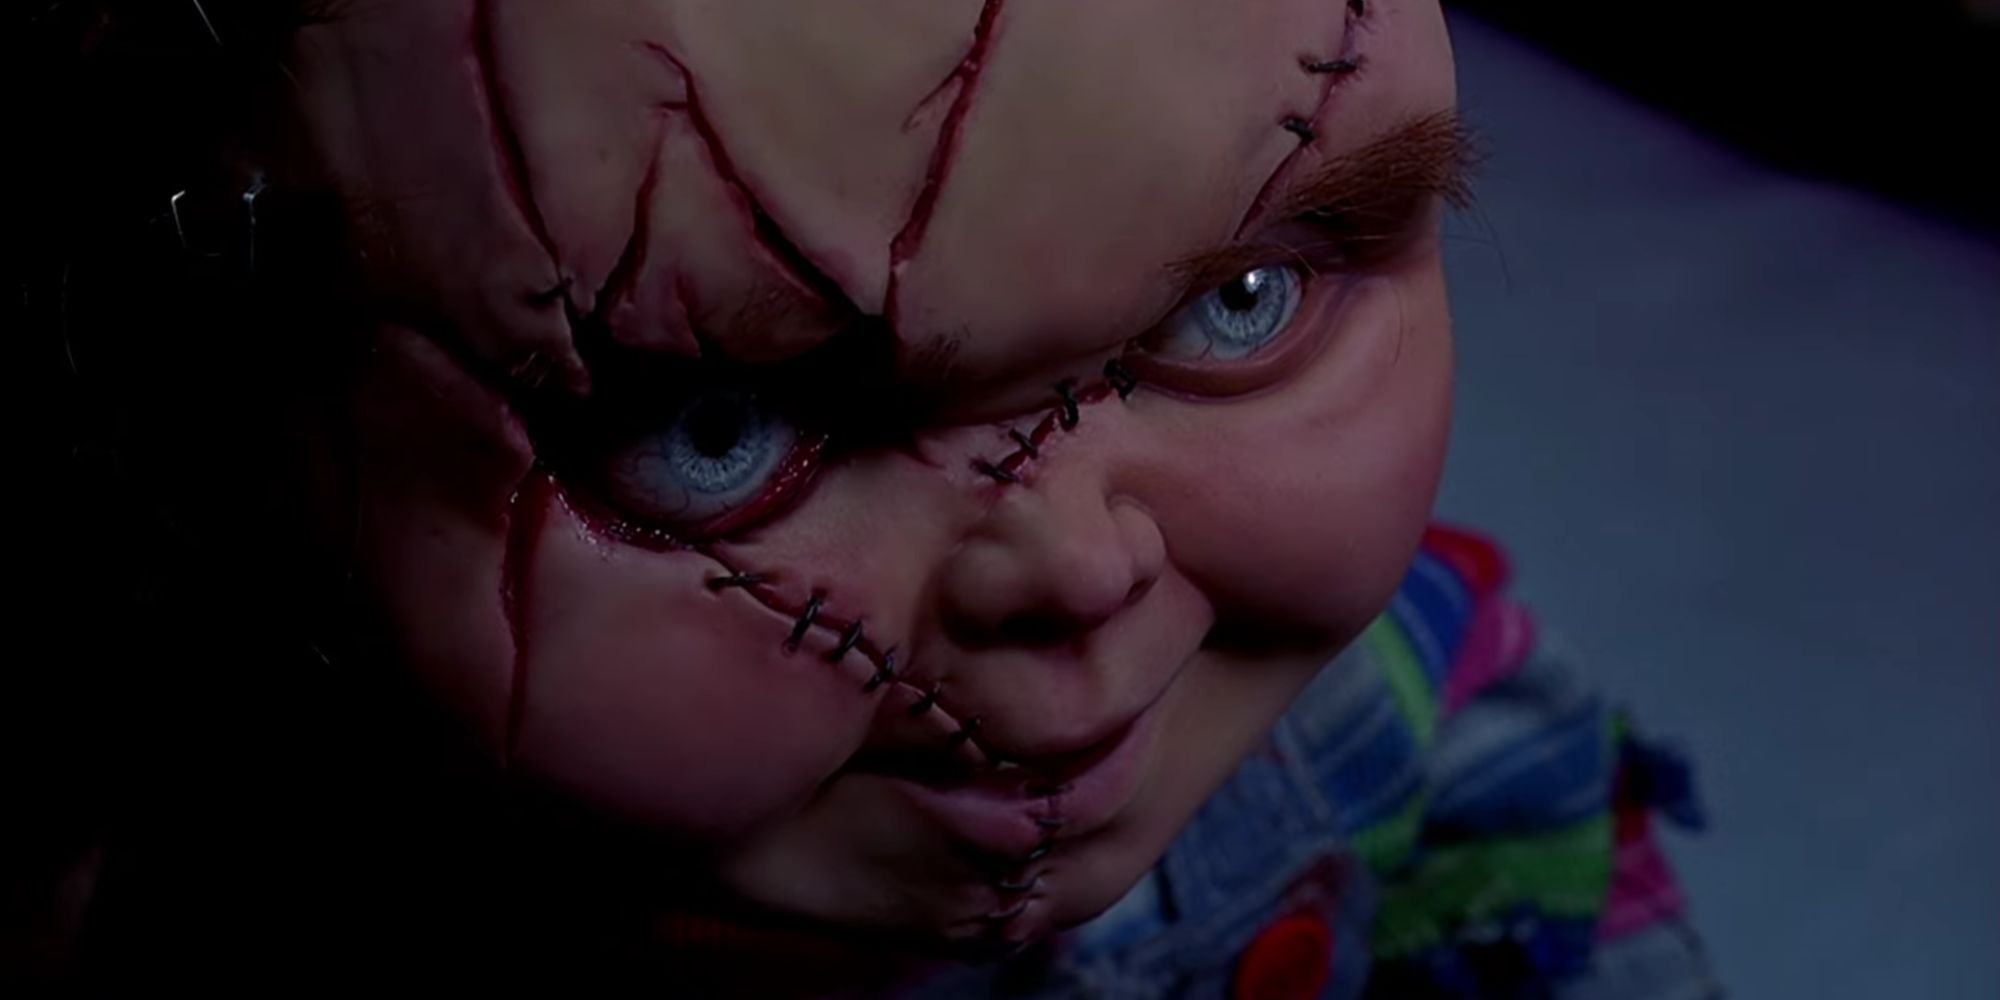 Chucky's stitched look from Bride of Chucky.